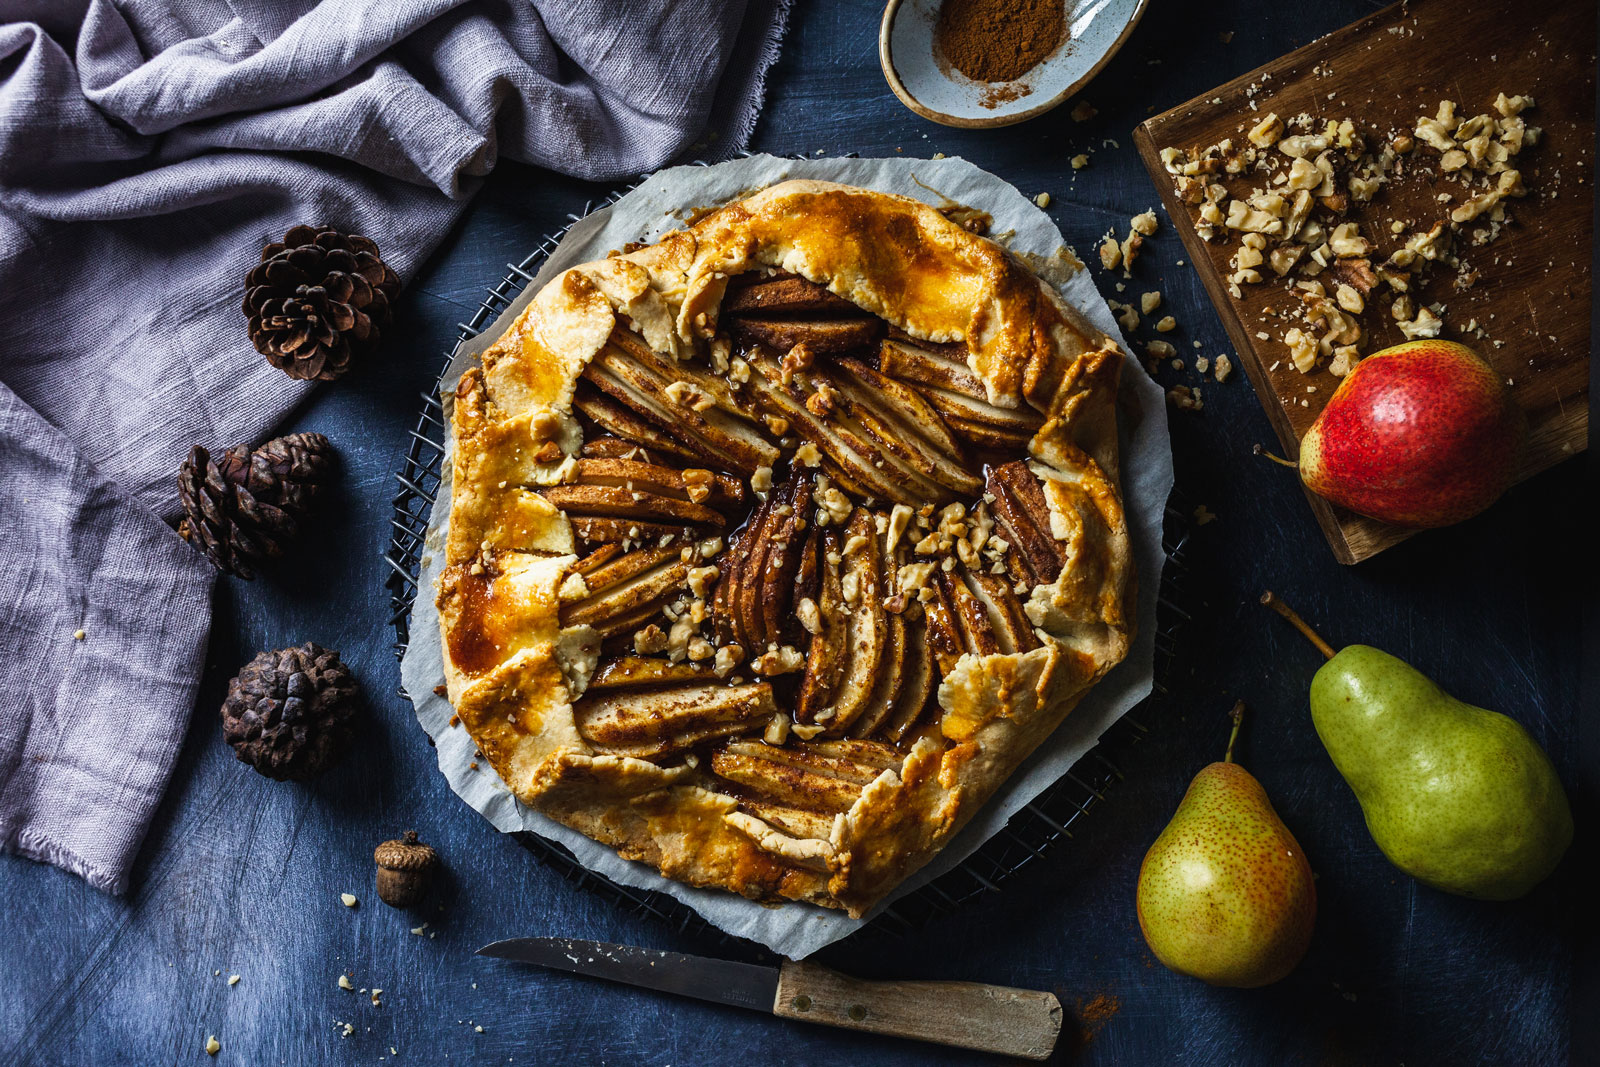 Spiced Pear Galette With Salted Maple Glaze